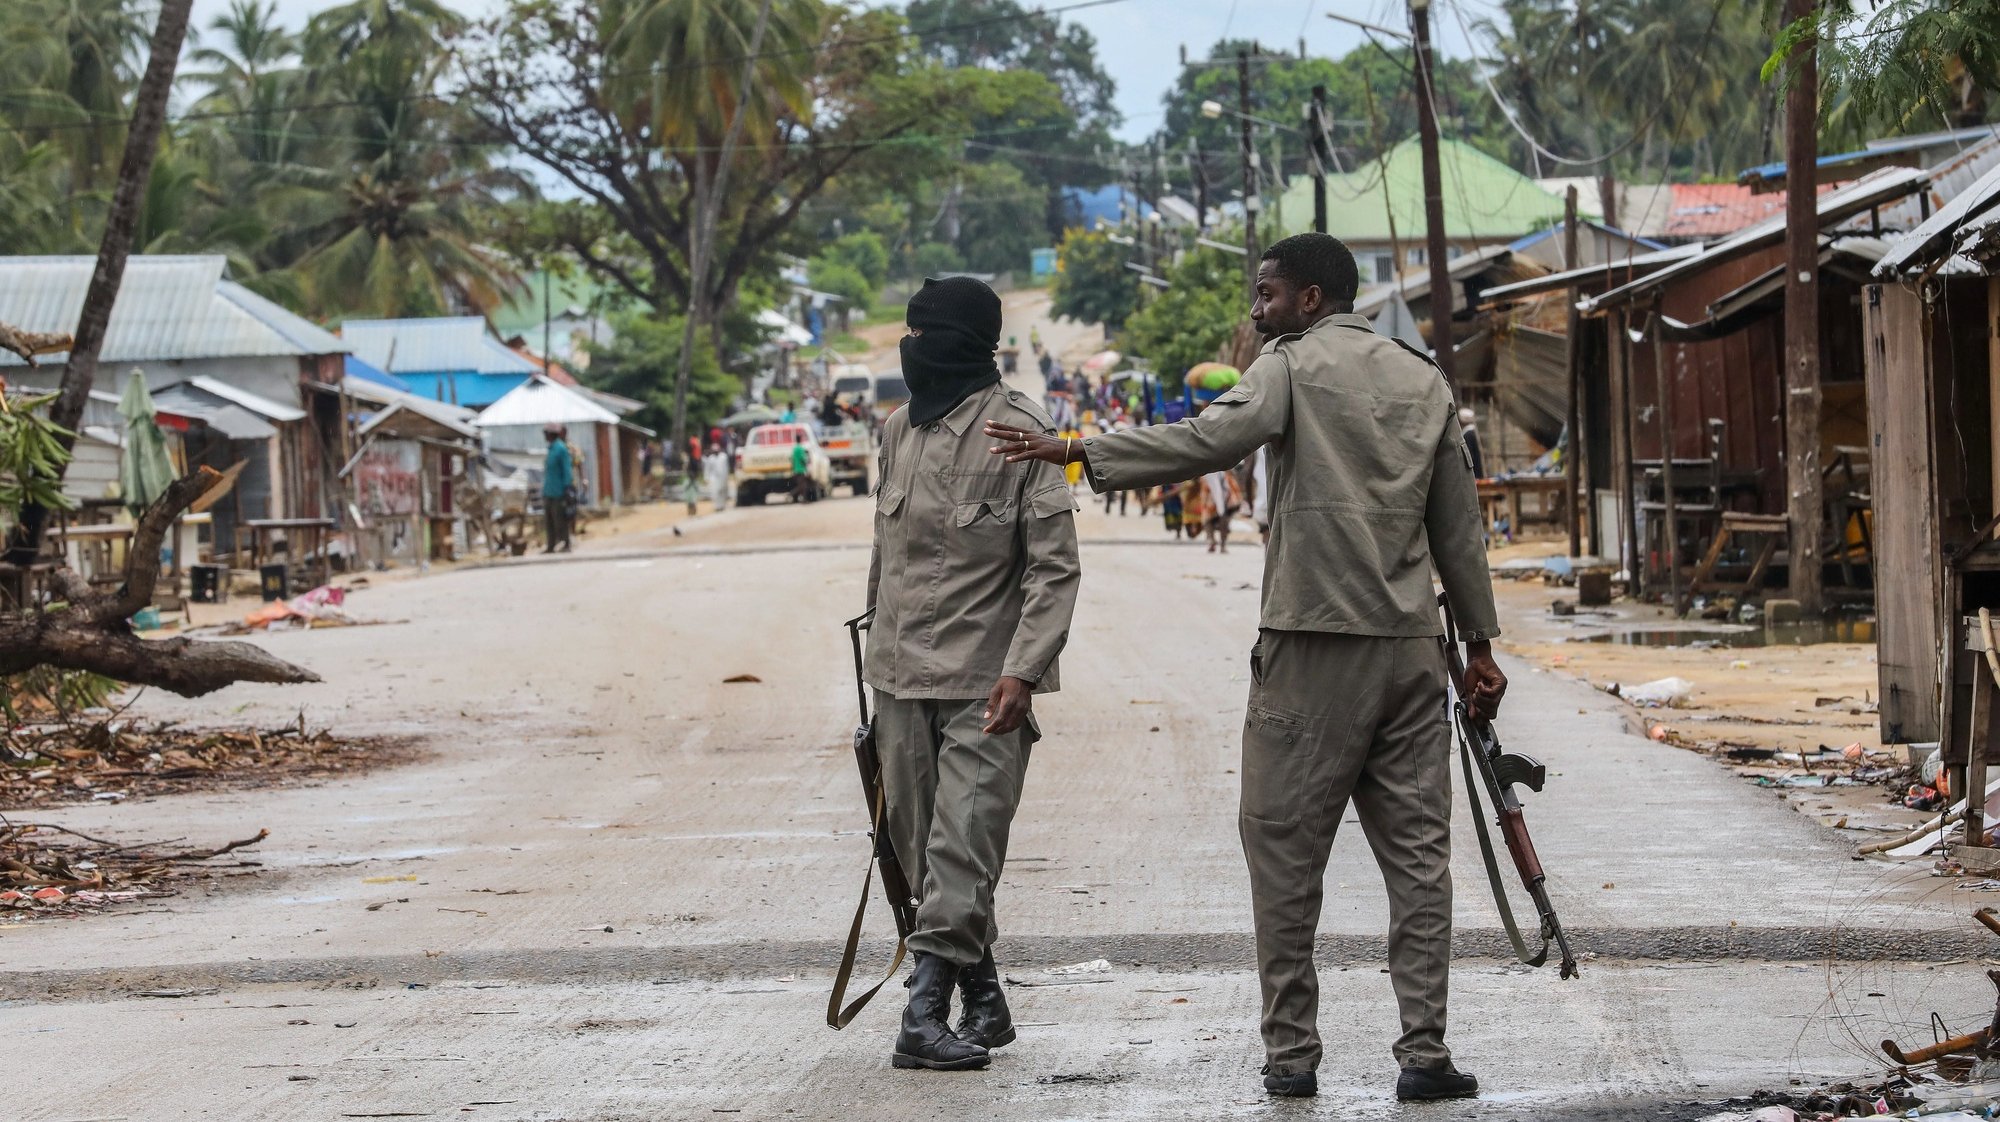 epa09131130 Mozambique army soldier patrols the streets of Palma, Cabo Delgado, Mozambique, 12 April 2021. The violence unleashed more than three years ago in Cabo Delgado province escalated again about two weeks ago, when armed groups first attacked the town of Palma.  EPA/JOAO RELVAS